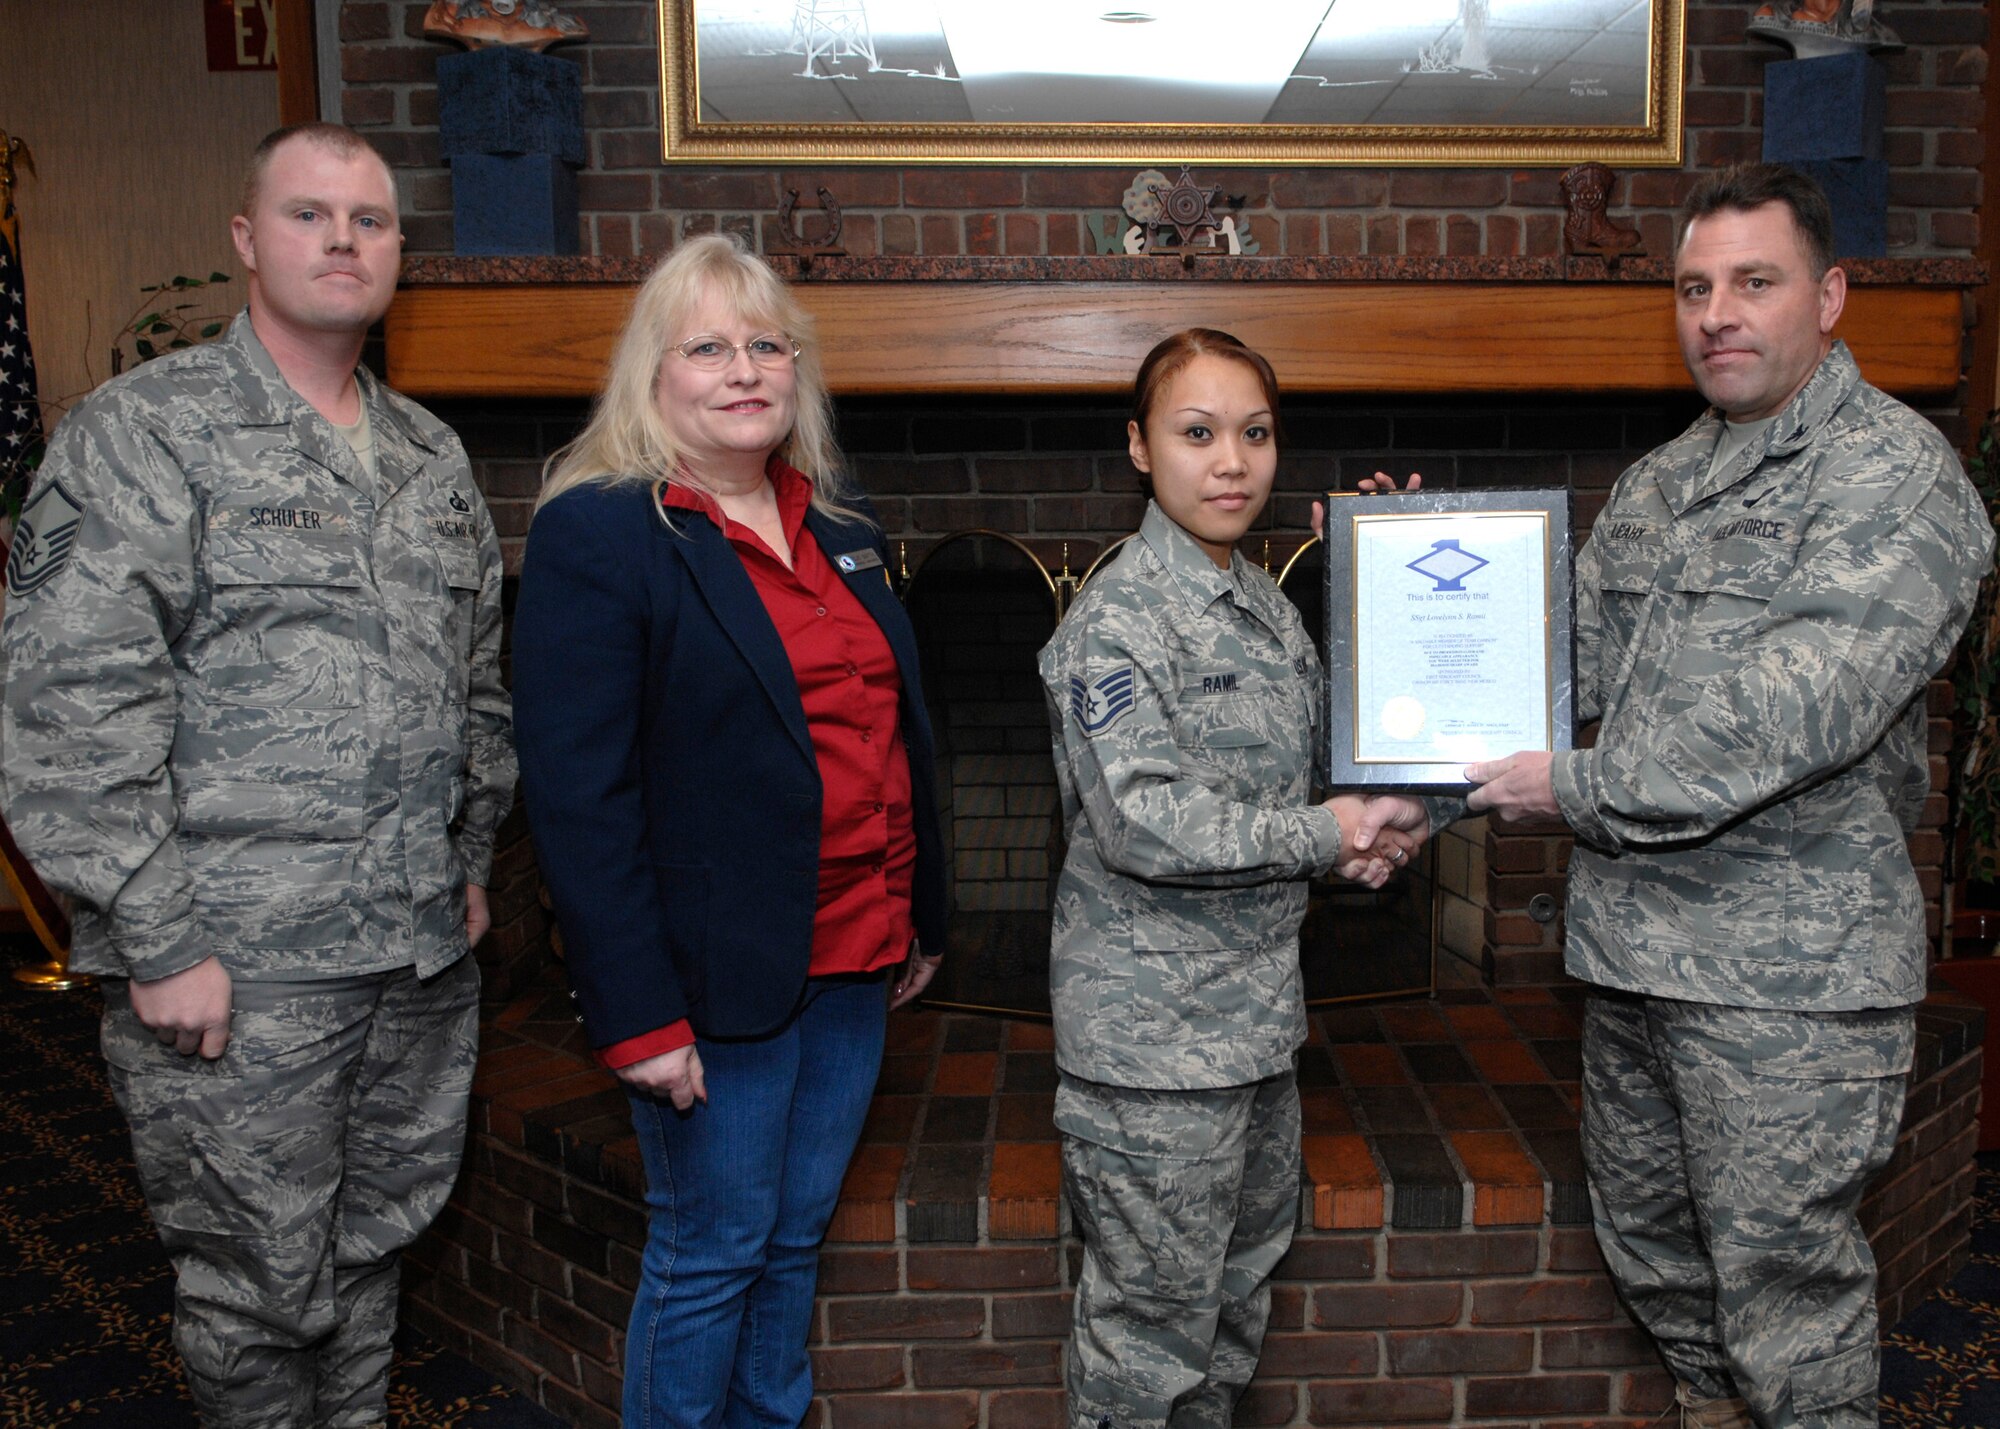 CANNON AIR FORCE BASE, N.M. - Staff Sgt. Lovelynn Ramil, 27th Special Operations Comptroller Squadron, receives the Diamond Sharp award presented by Col. Timothy Leahy, 27th Special Operations Wing commander, and Master Sgt. Russell Schuler, 27 SOCPTS first sergeant. Diamond Sharp was sponsored by the Defense Commissary Agency, represented by Ms. Sue Smith, and took place at the Pecos Trail Dining Facility. (U.S. Air Force photo by Airman 1st Class Erik Cardenas)